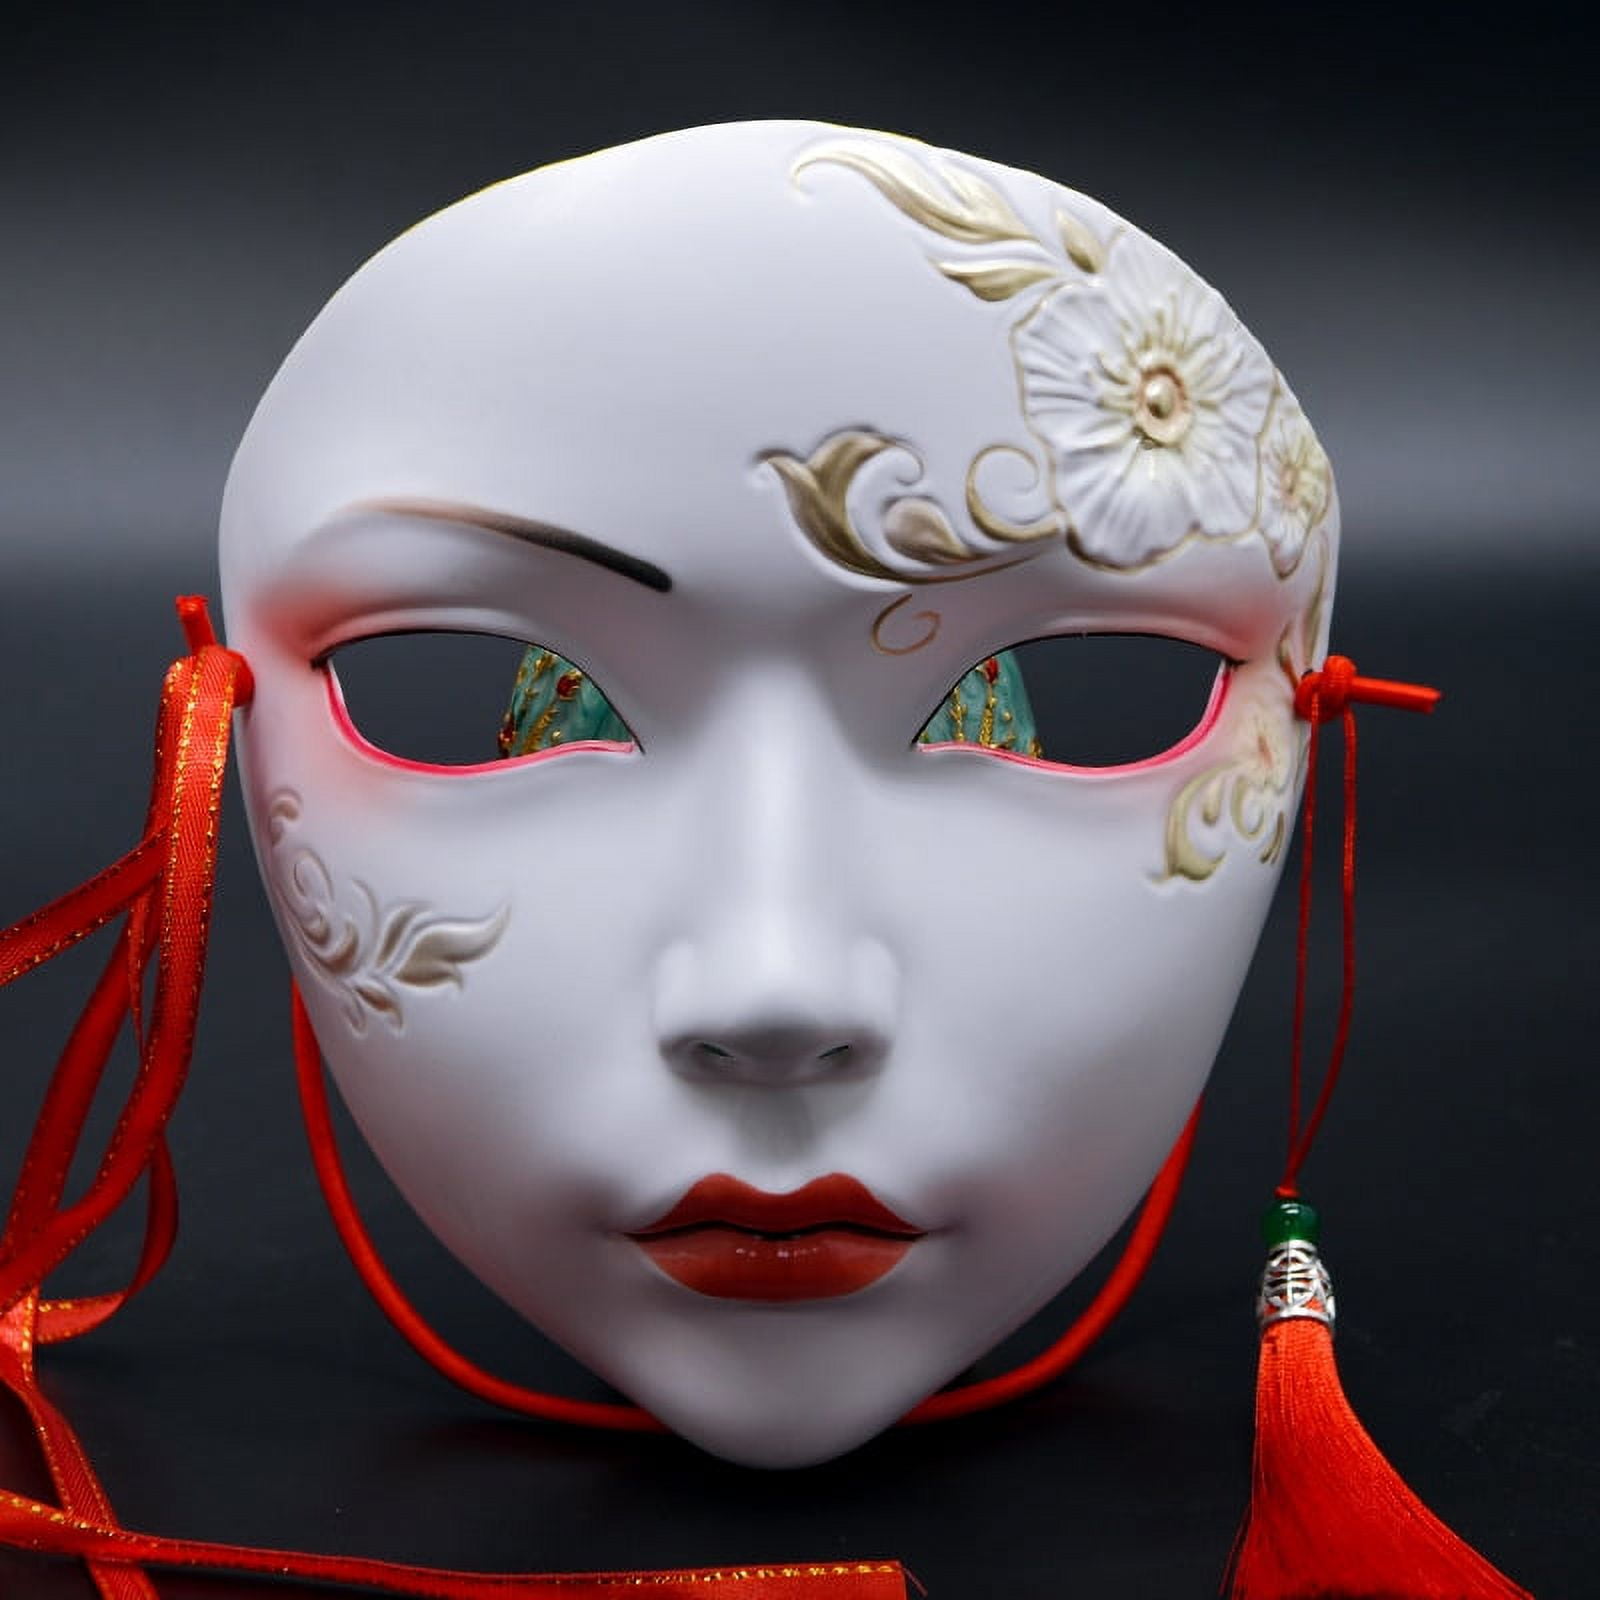 Exquisite Masquerade Mask, Venetian Style Masks, Party Mask, Women Mask -  China Masquerade and Exquisite price